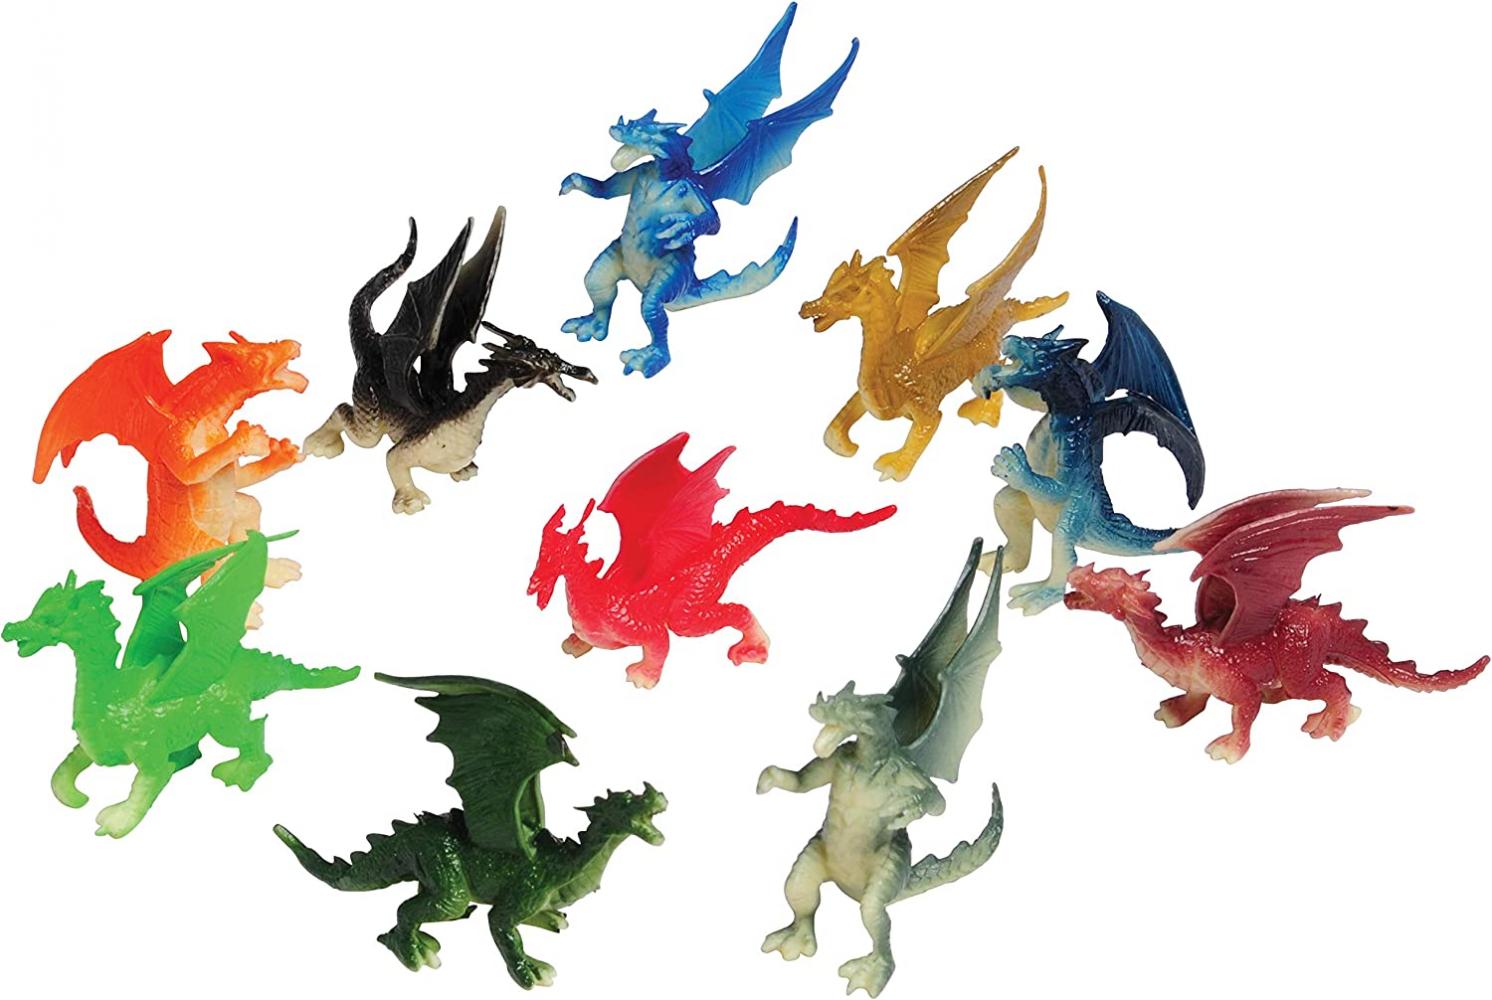 U.S. Toy Assorted Color and Design Mini Dragon Action Figures (12)